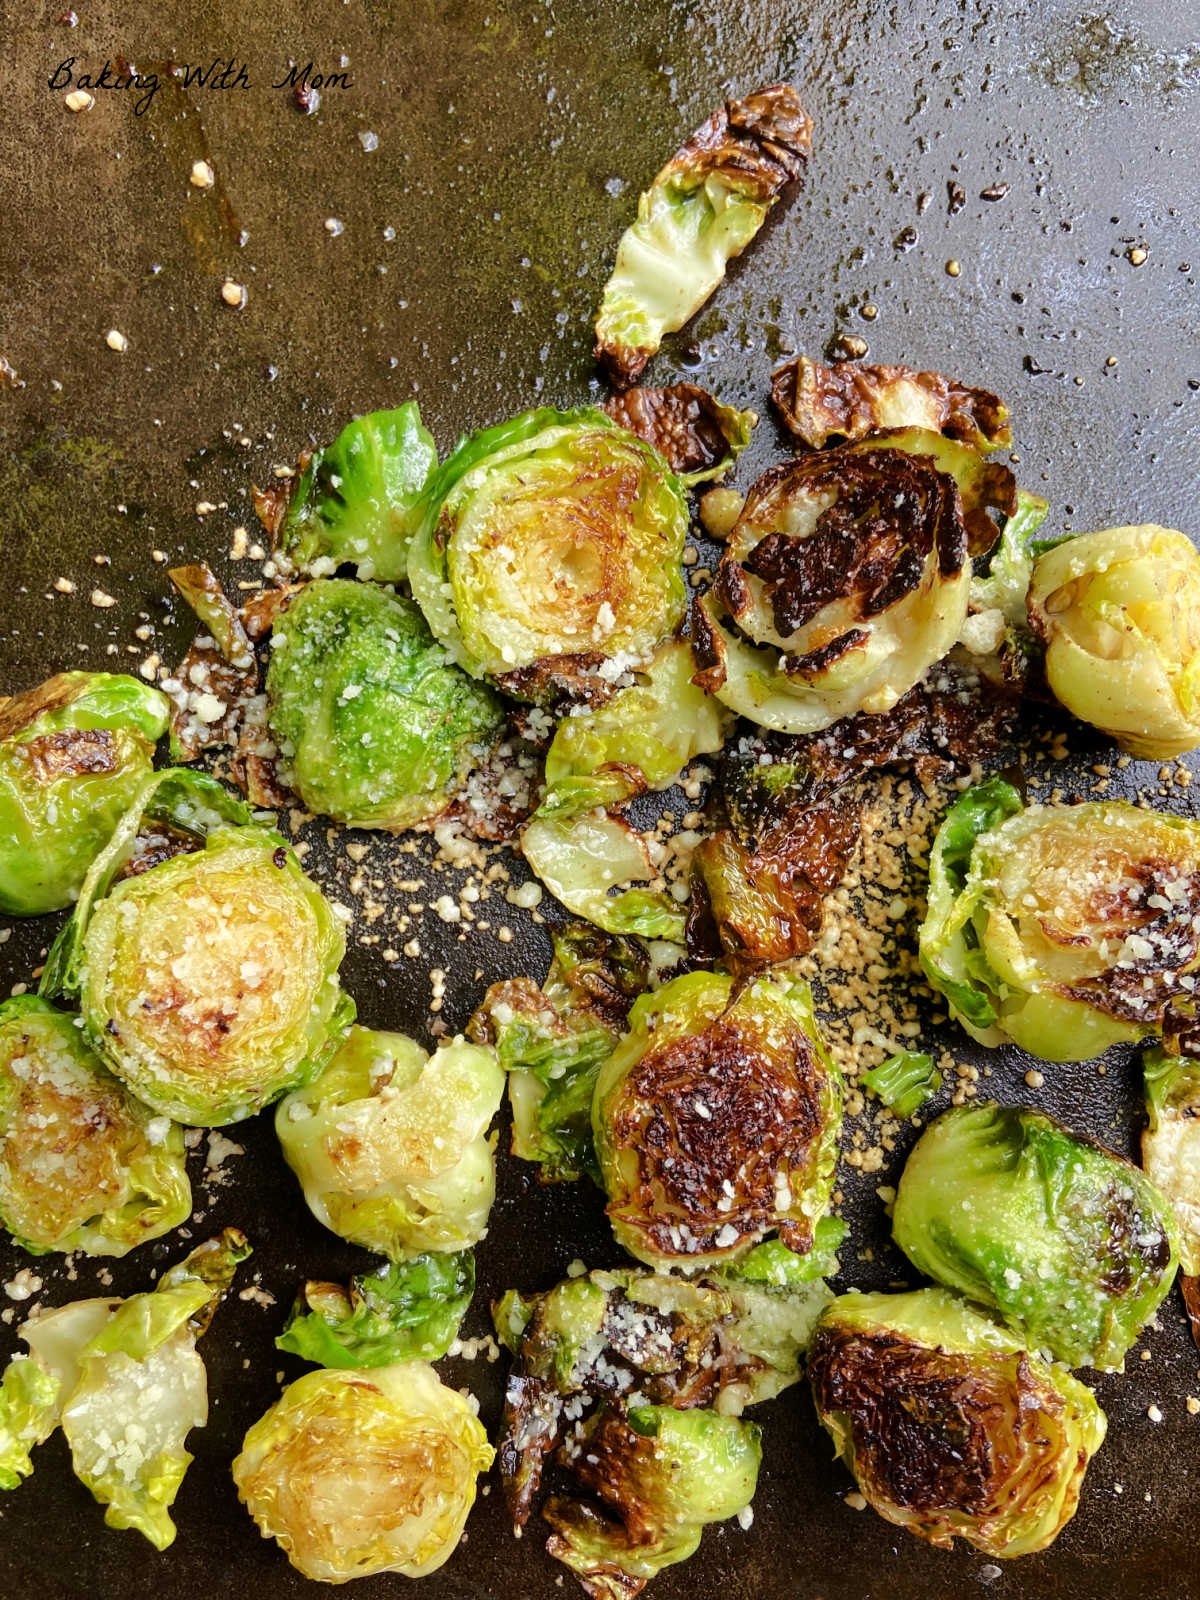 Grilled brussel sprouts on a flattop grill with parmesan cheese.